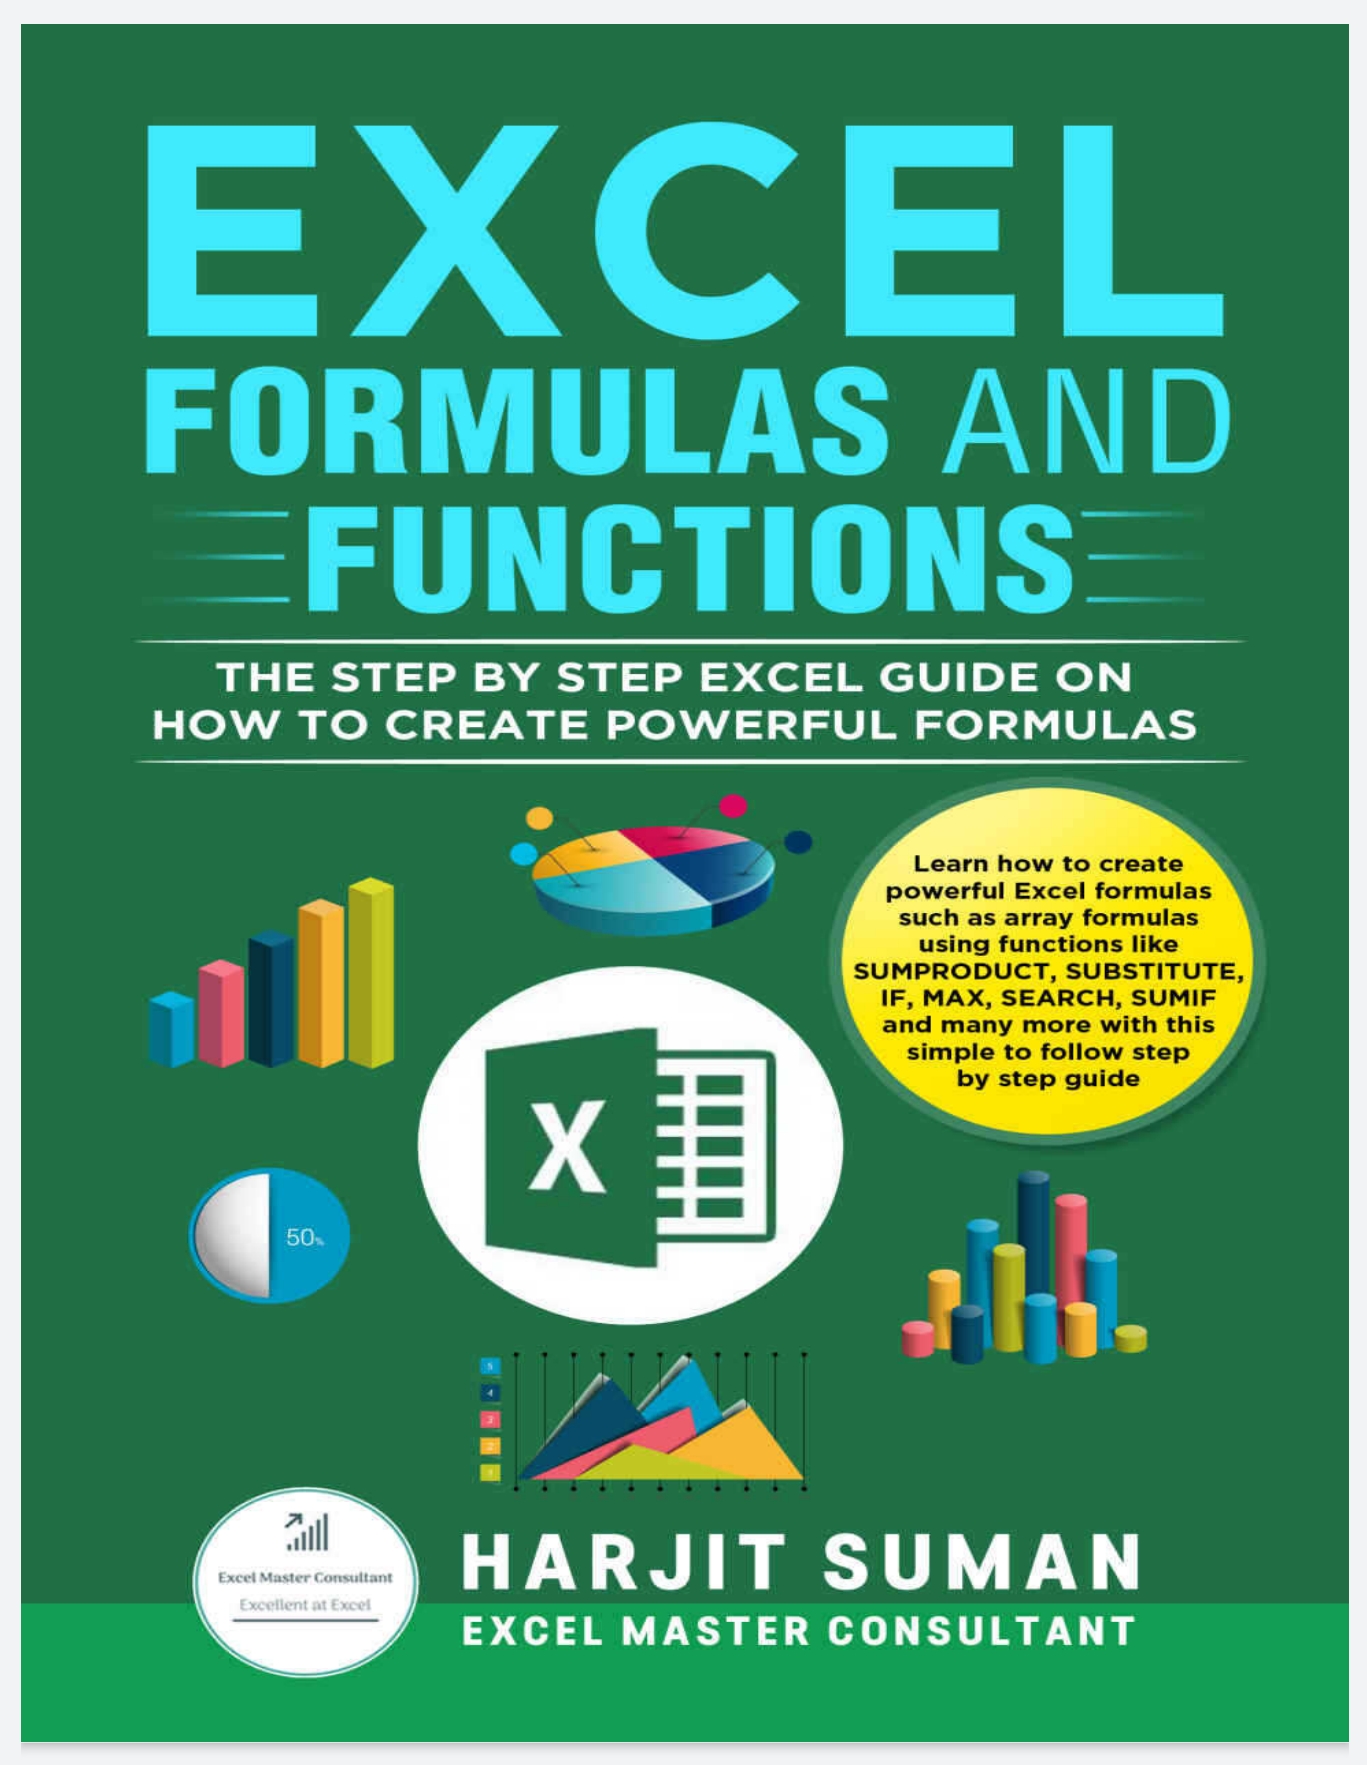 presentation on excel formulas and functions